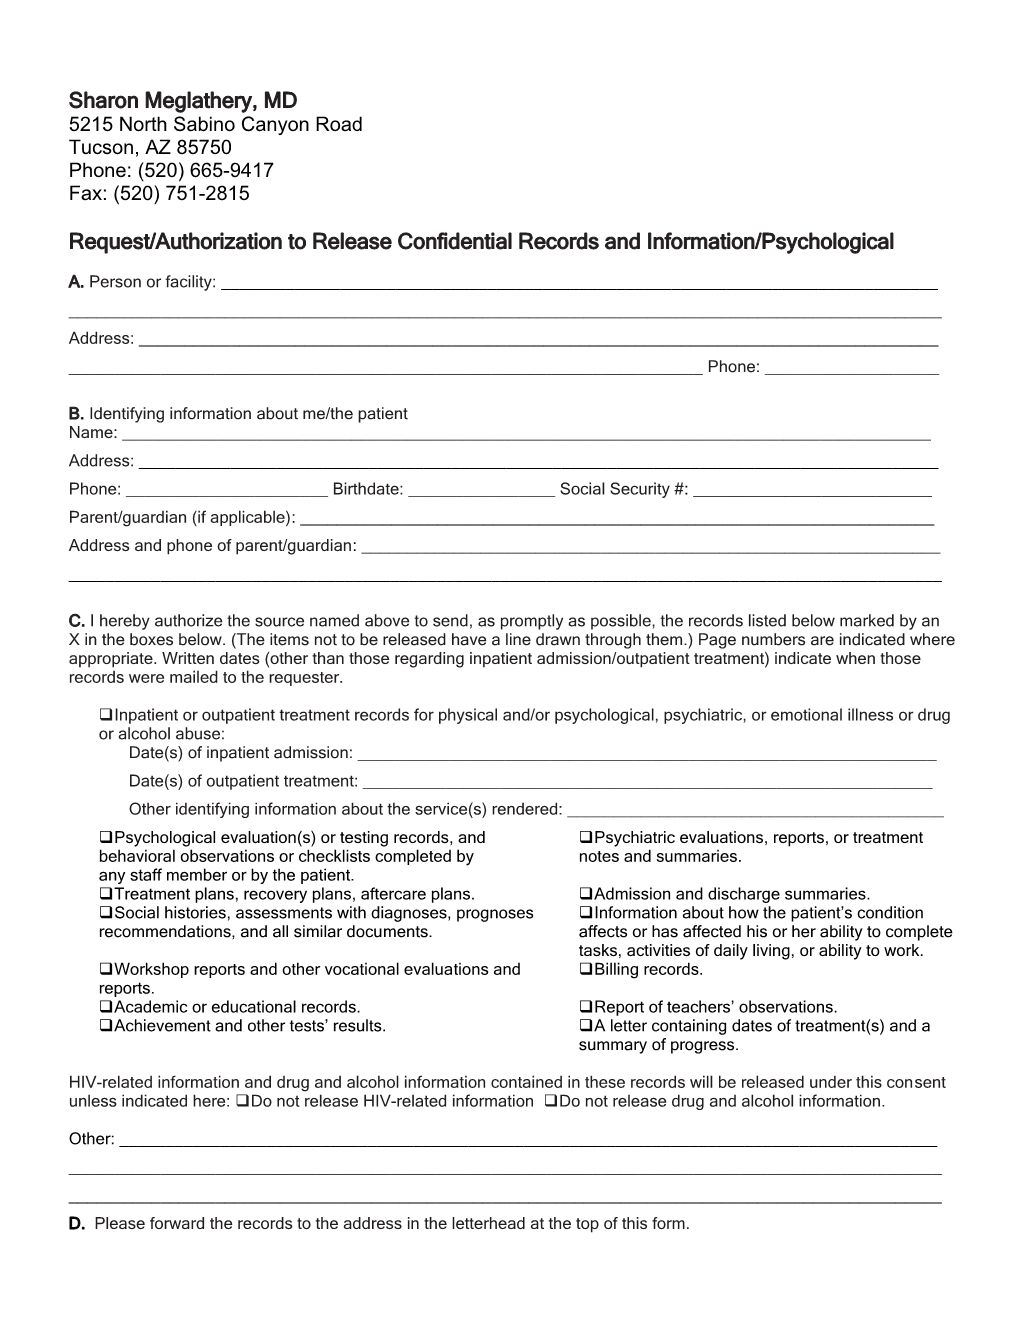 Request/Authorization to Release Confidential Records and Information/Psychological